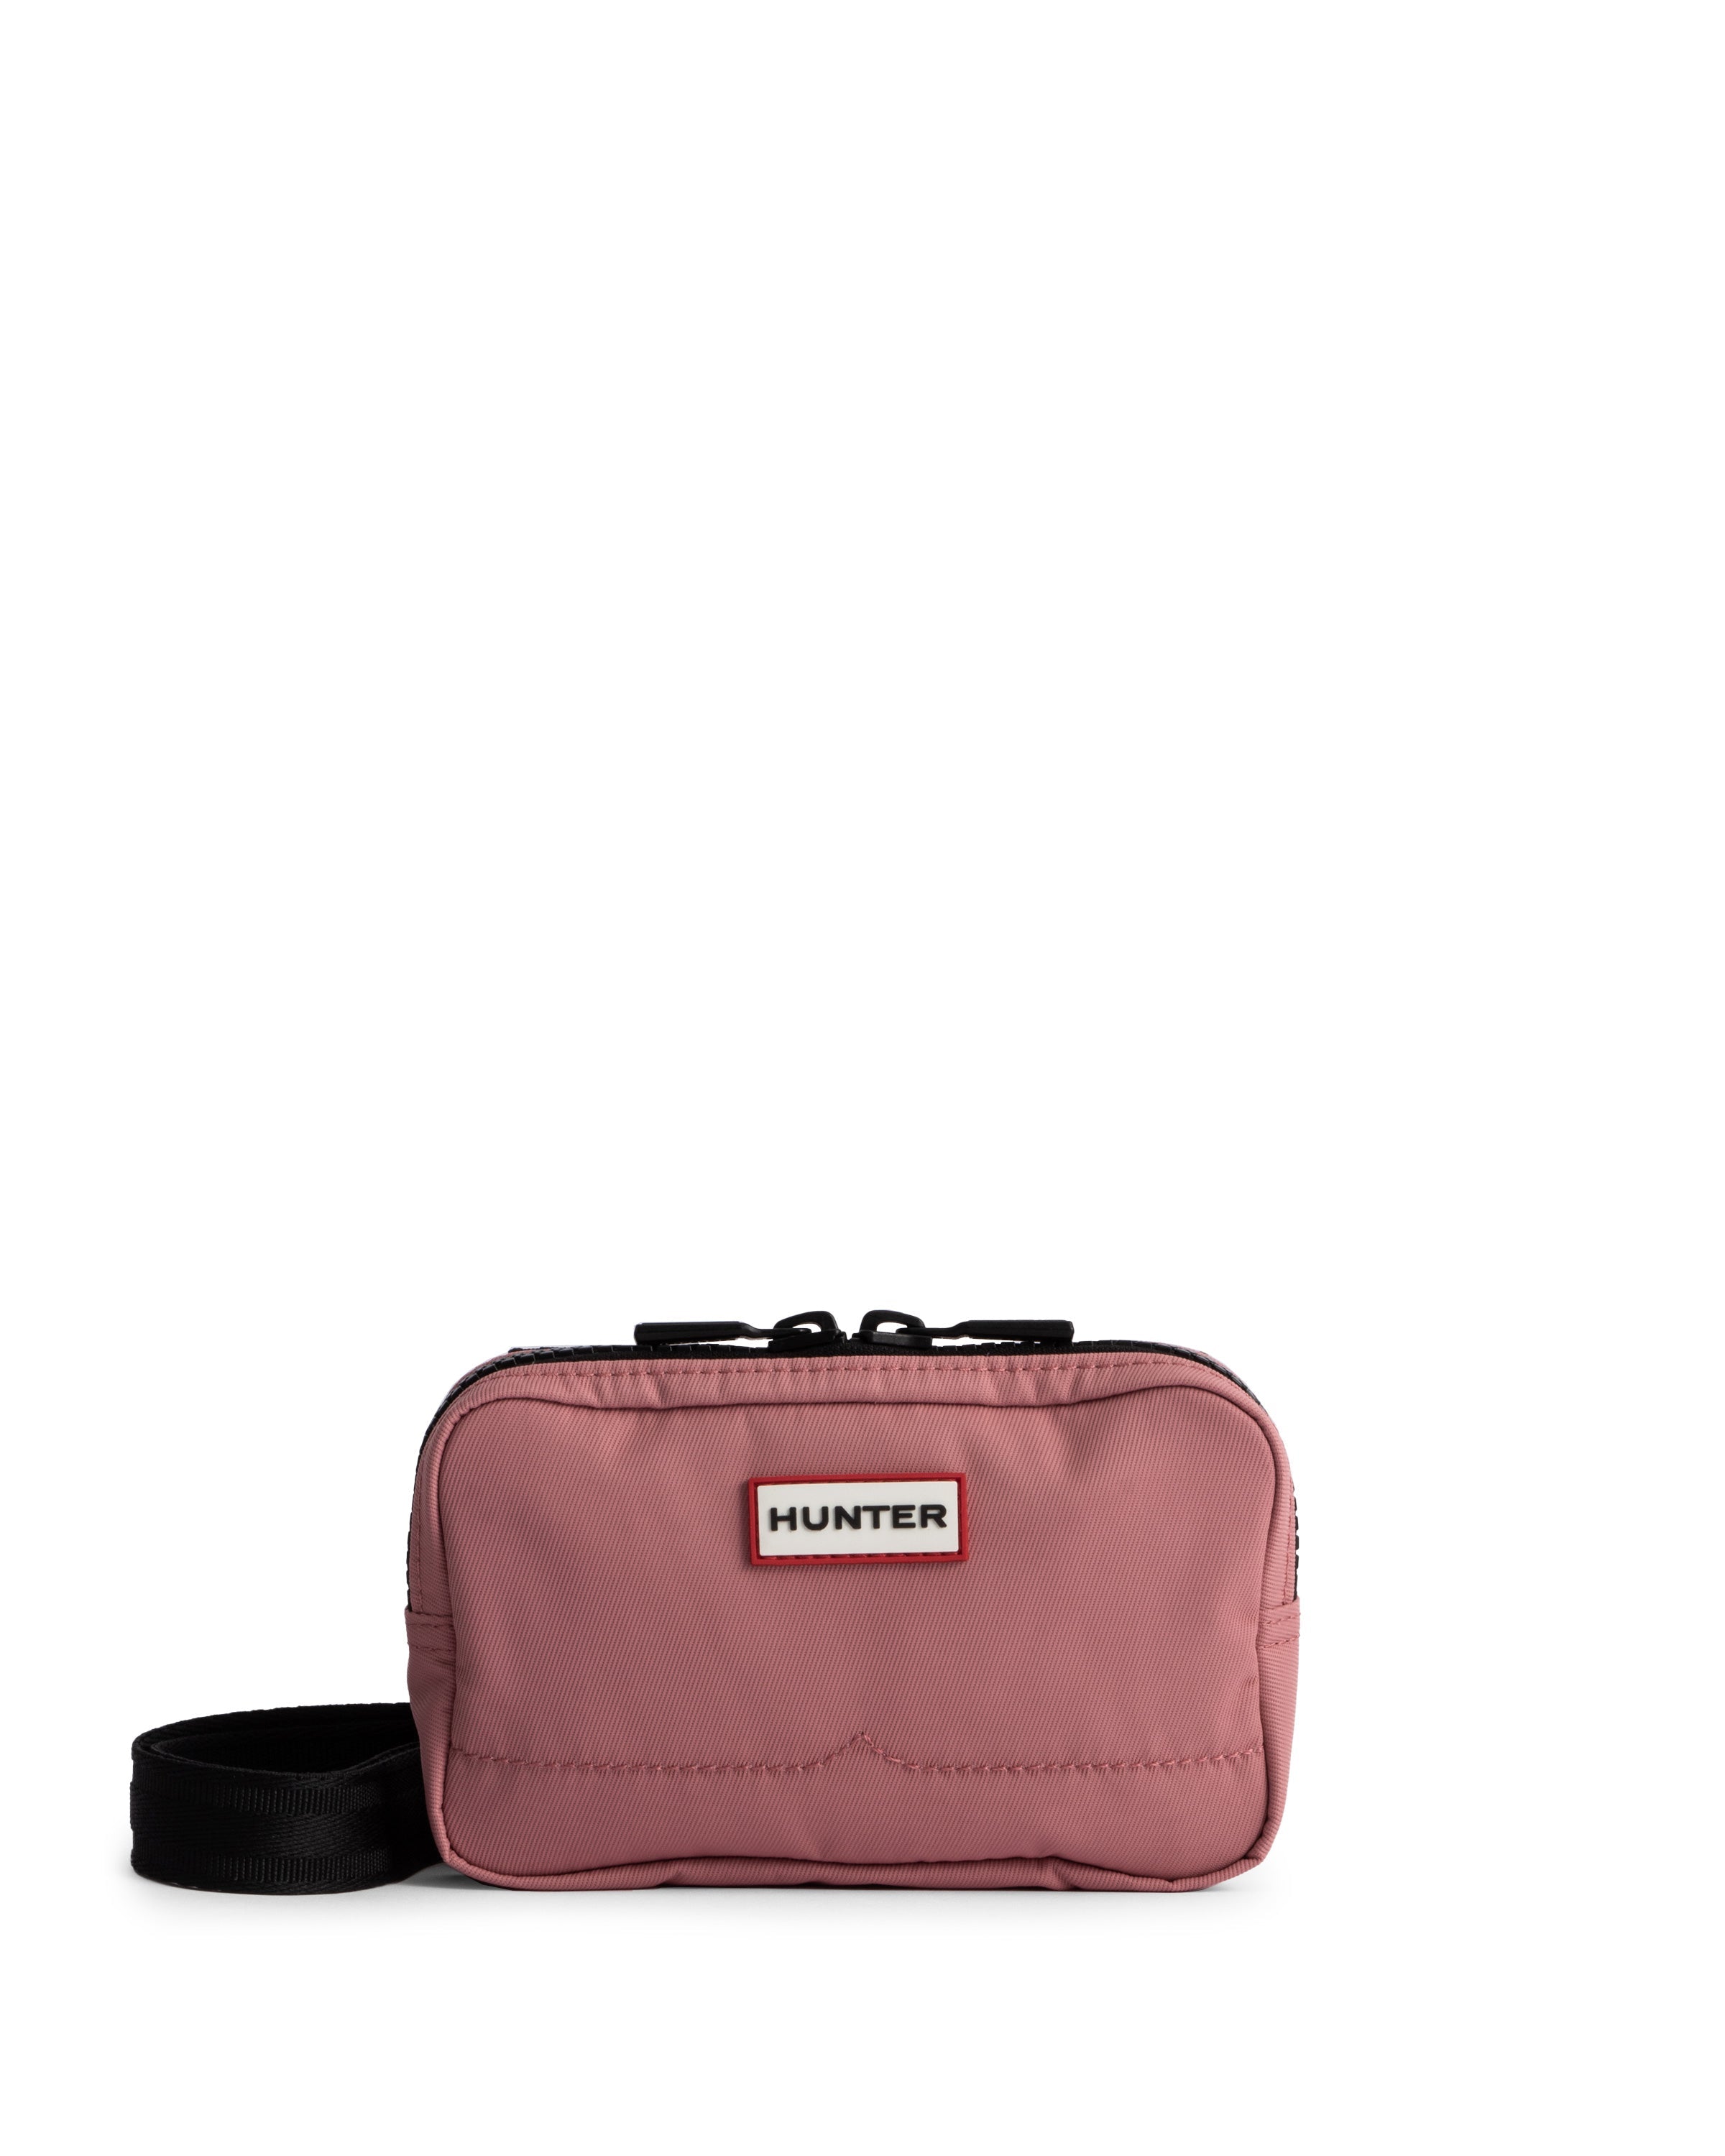 Nylon Keeper Phone Pouch - Spring Pink